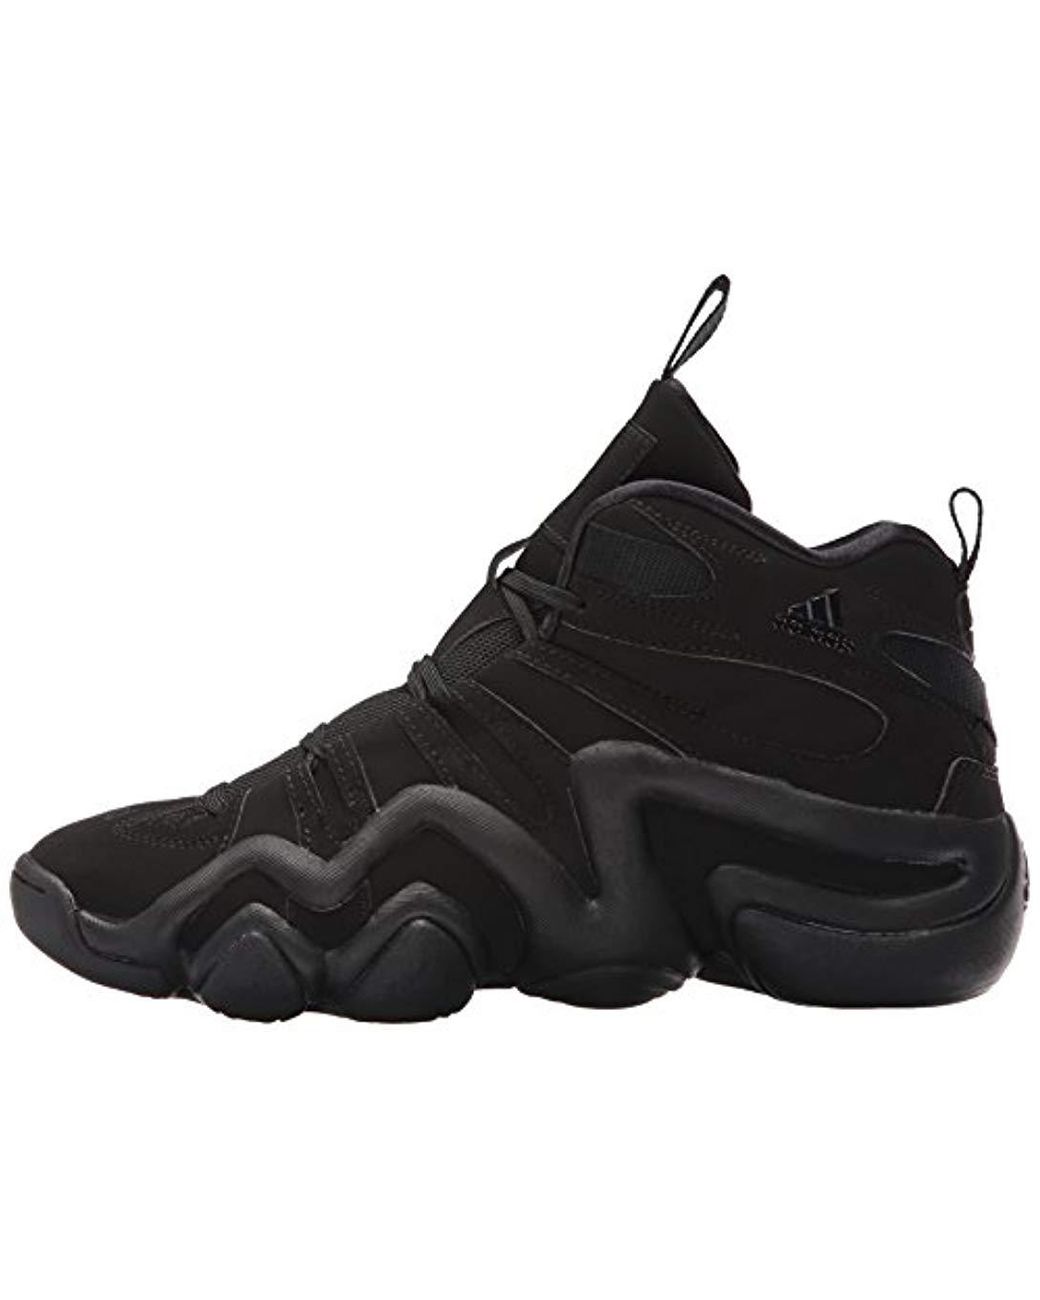 adidas Synthetic Performance Crazy 8 Basketball Shoe in Black/Black/Black  (Black) for Men | Lyst